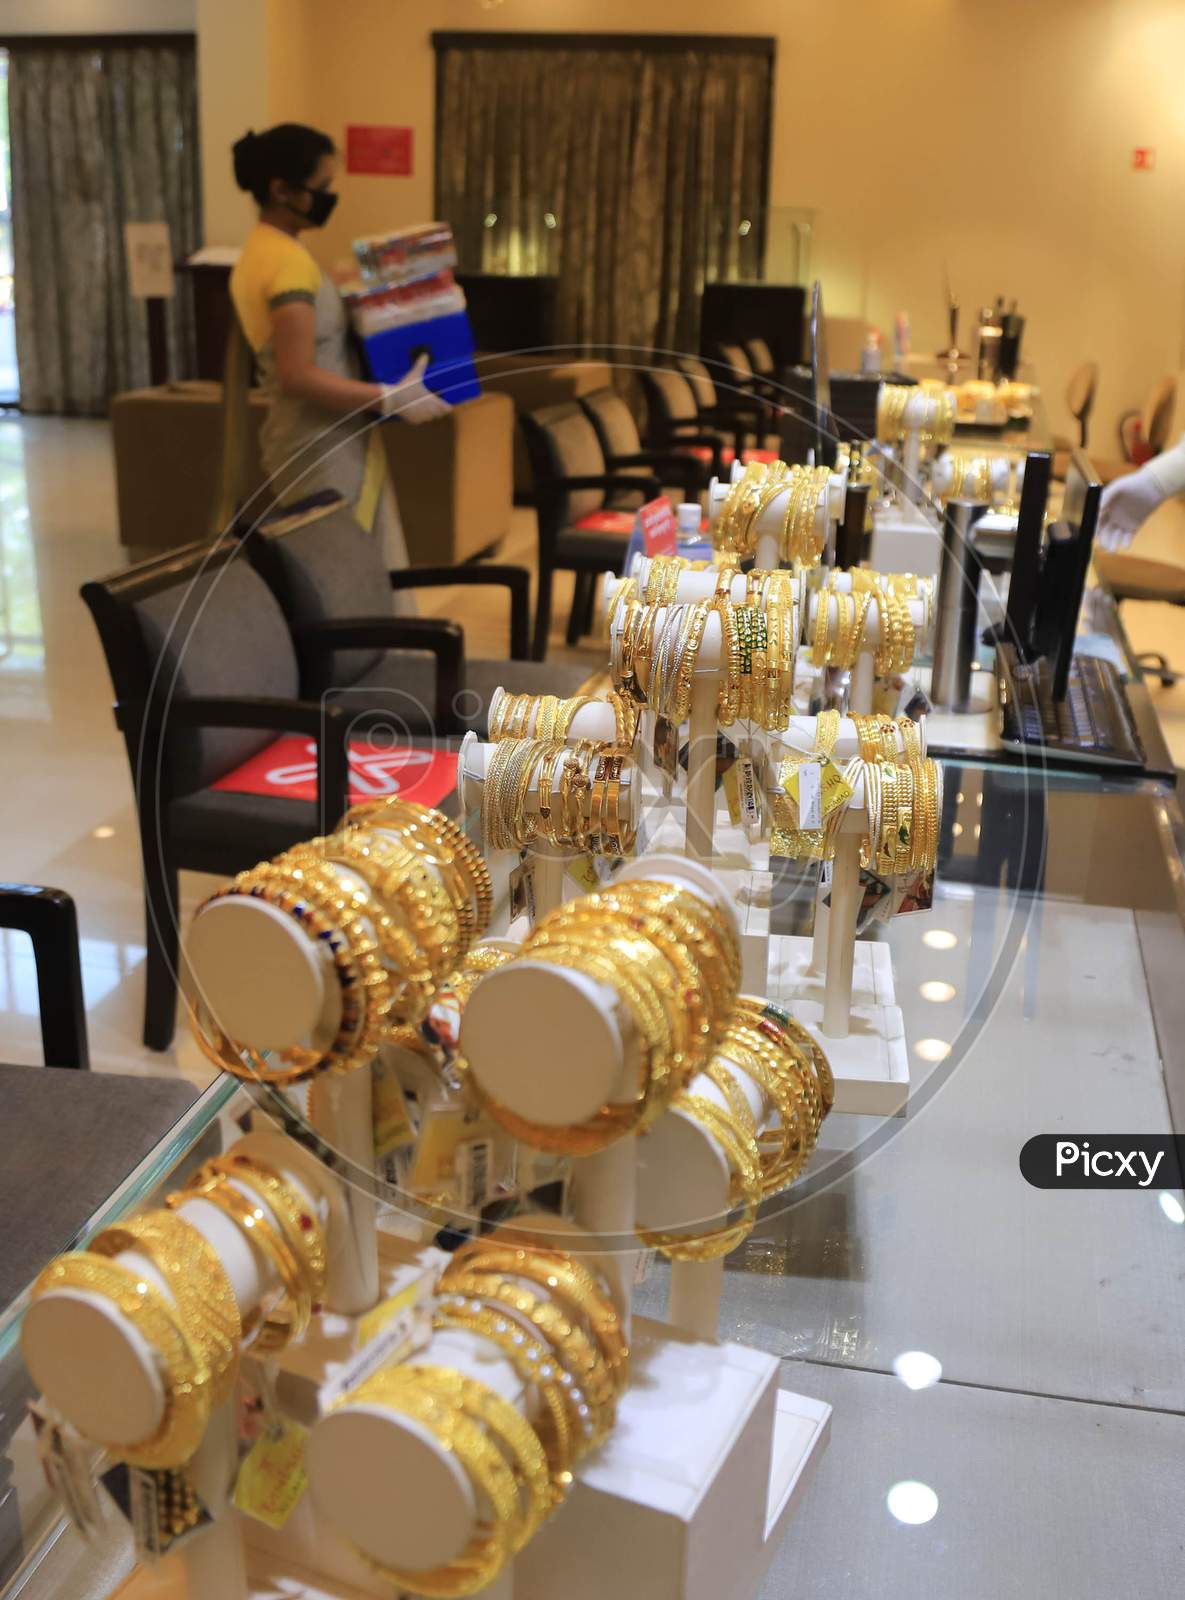 A Sales Girl Arranges Jewellery At A Shop After  Authorities Allowed Shopkeepers To Open Their Establishments With Certain Restrictions During Coronavirus or COVID-19 Pandemic in Prayagraj, May 20,2020